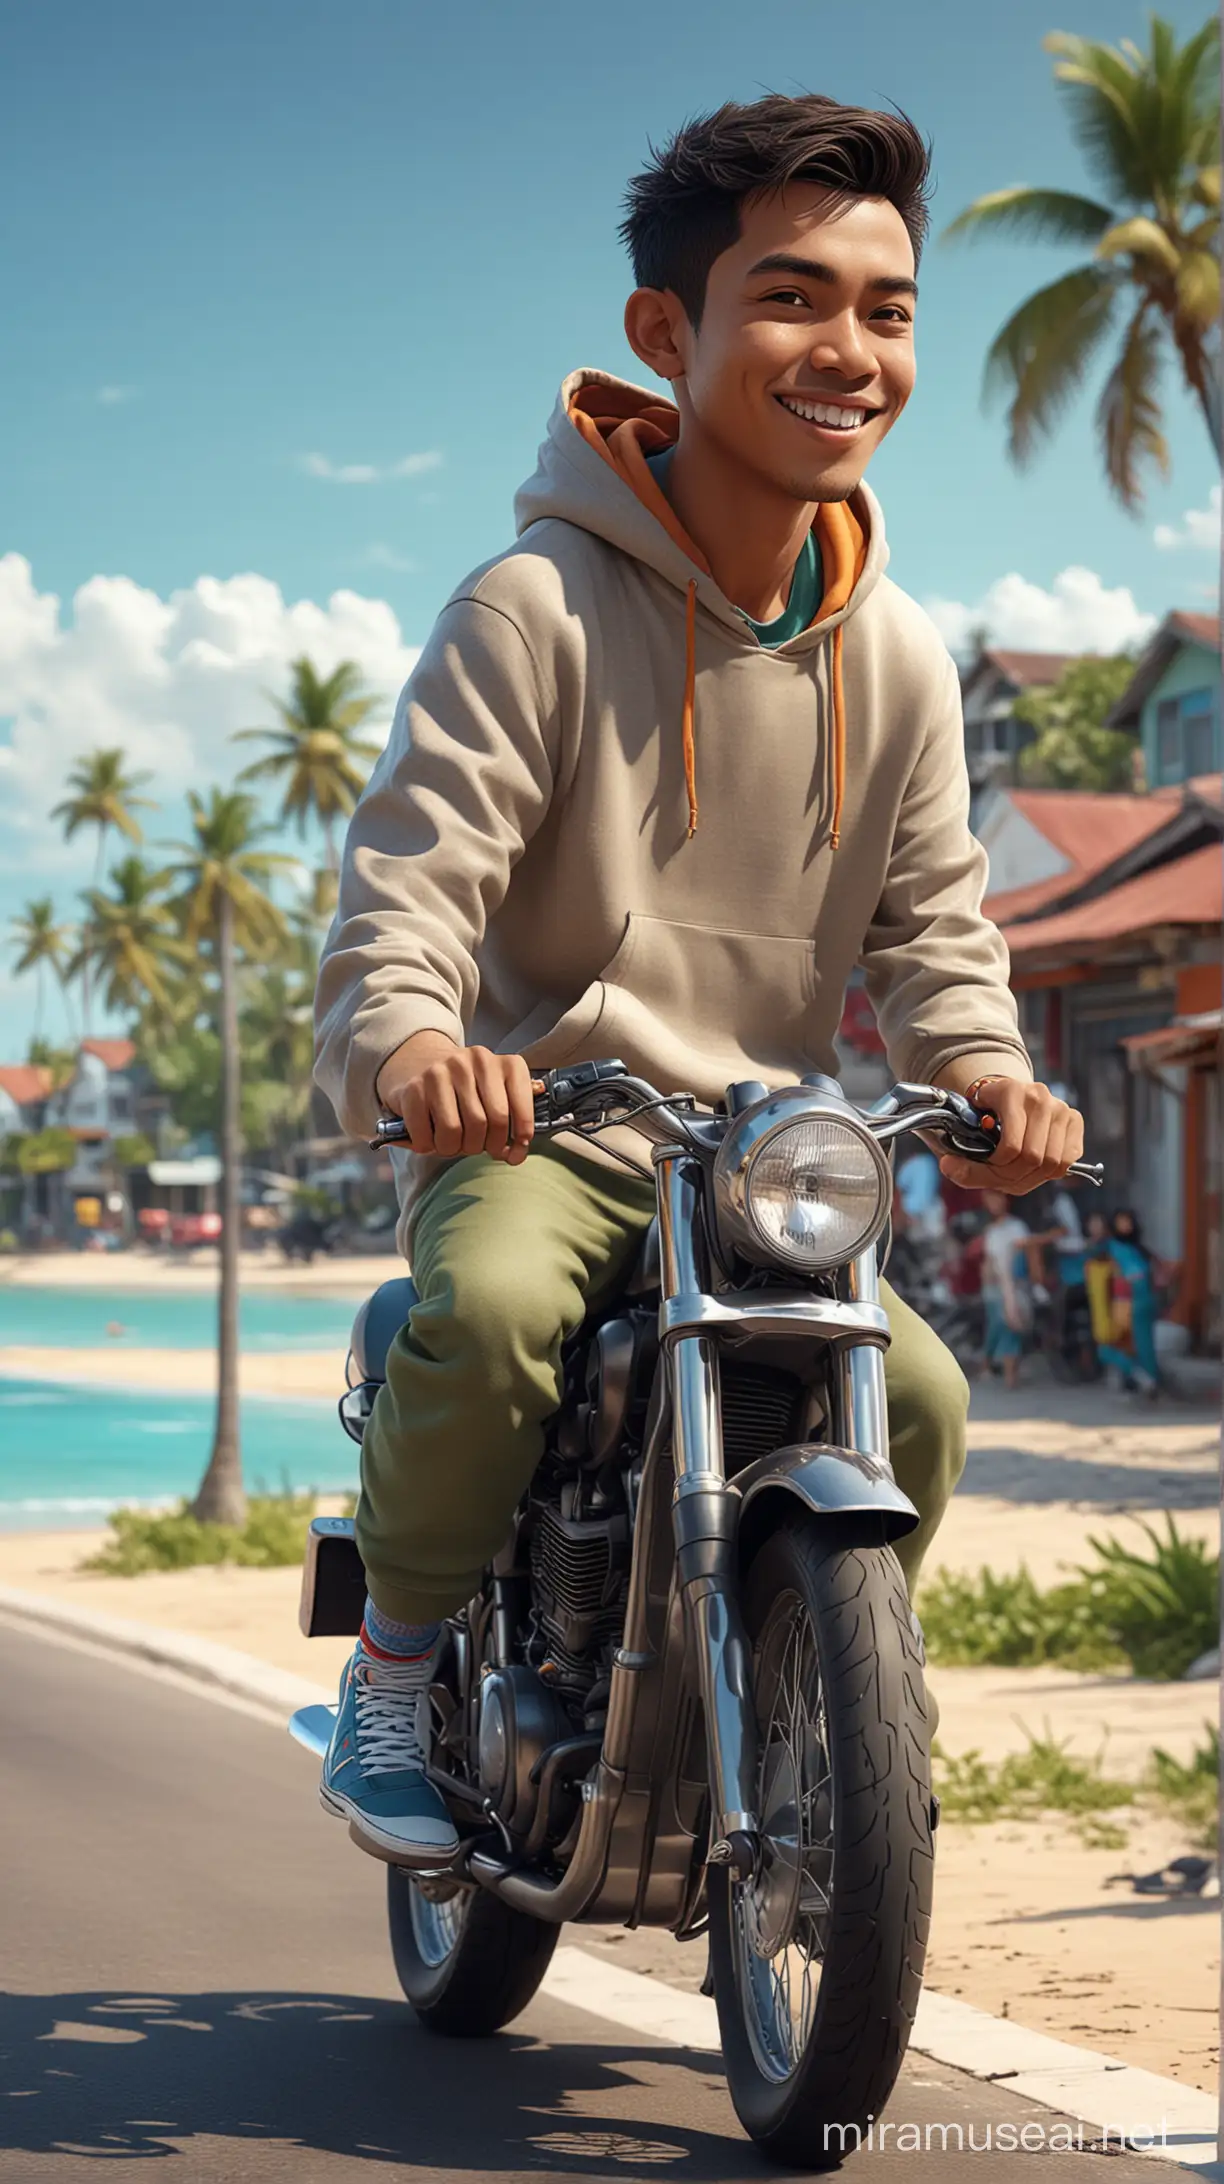 3d caricature of an Indonesian man with short hair is wearing a stylish hoodie and sneakers, riding a motor cycle near a beautiful beach with a typical Indonesian street background. The hyper-realistic rendering emphasizes high contrast and vibrant colors, providing an 8K resolution for intricate details. The focus is on capturing the dynamic essence of the man enjoying his ride in this scenic and lively environment.